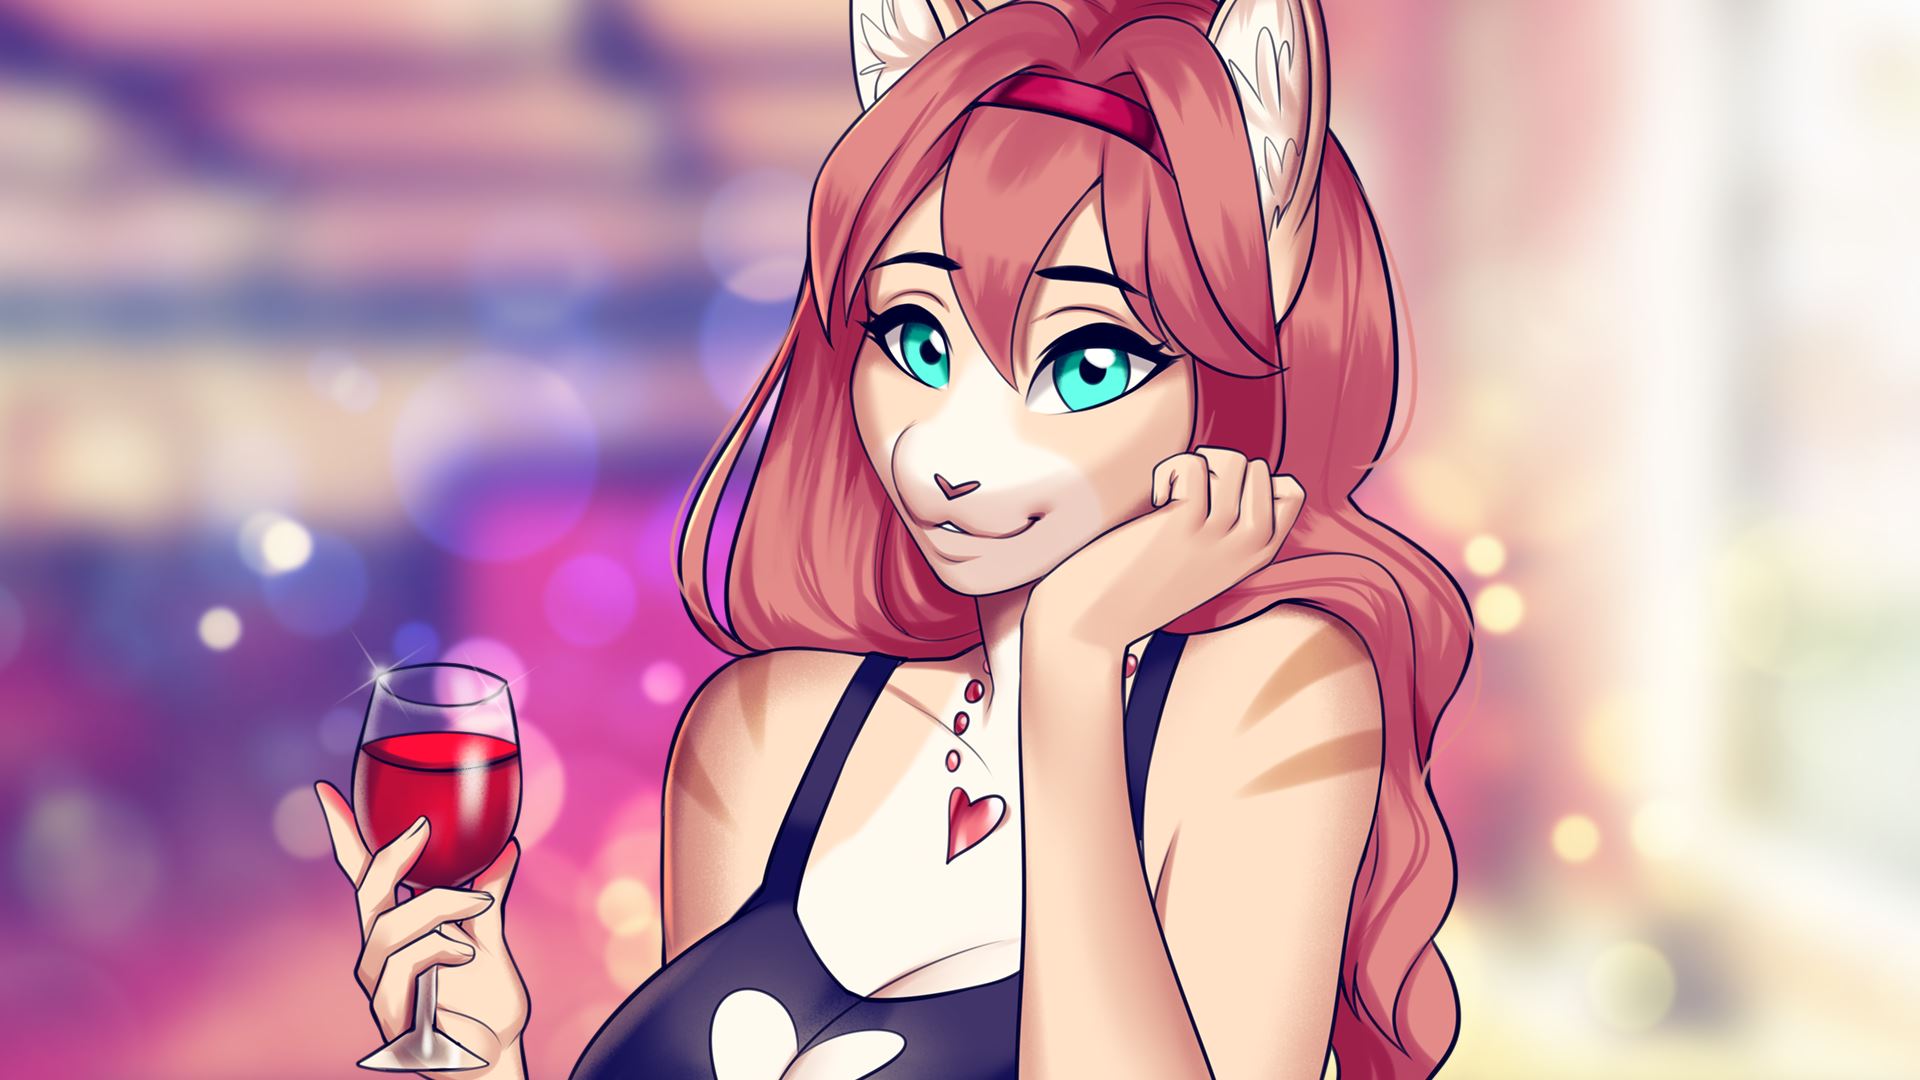 Fox Furry Games - My Furry Maid Ren'Py Porn Sex Game v.Final Download for Windows, Linux